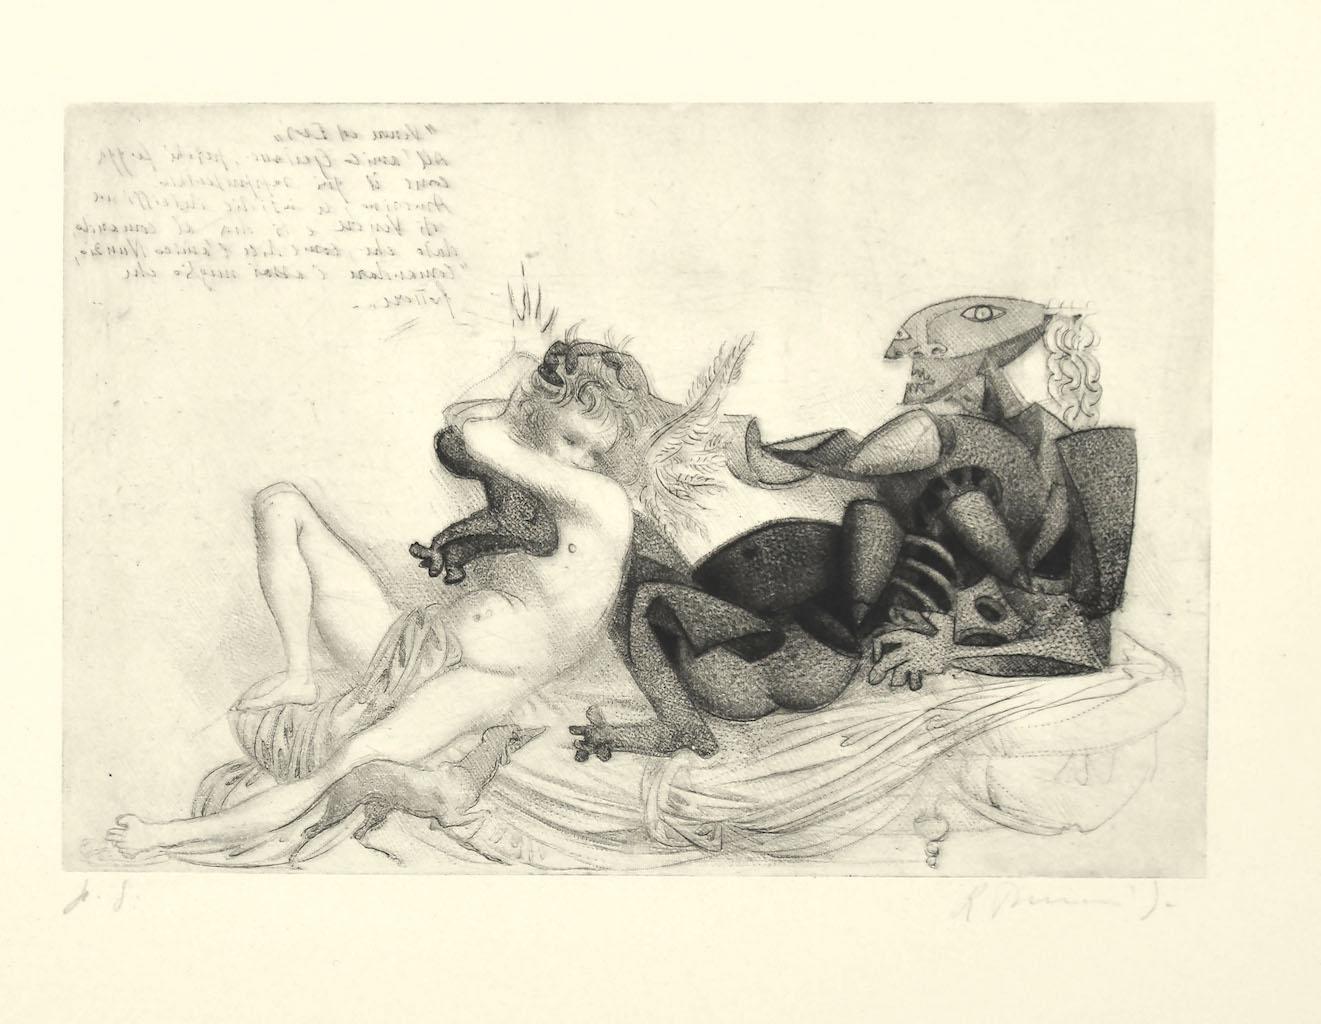 Courtship is an original etching artwork realized by the Italian artist Riccardo Tommasi Ferroni (1934-2000).

Hand-signed in pencil on the lower right margin. Image Dimensions: 17.5 x26 cm

The state of preservation is very good.

Tommasi Ferroni's